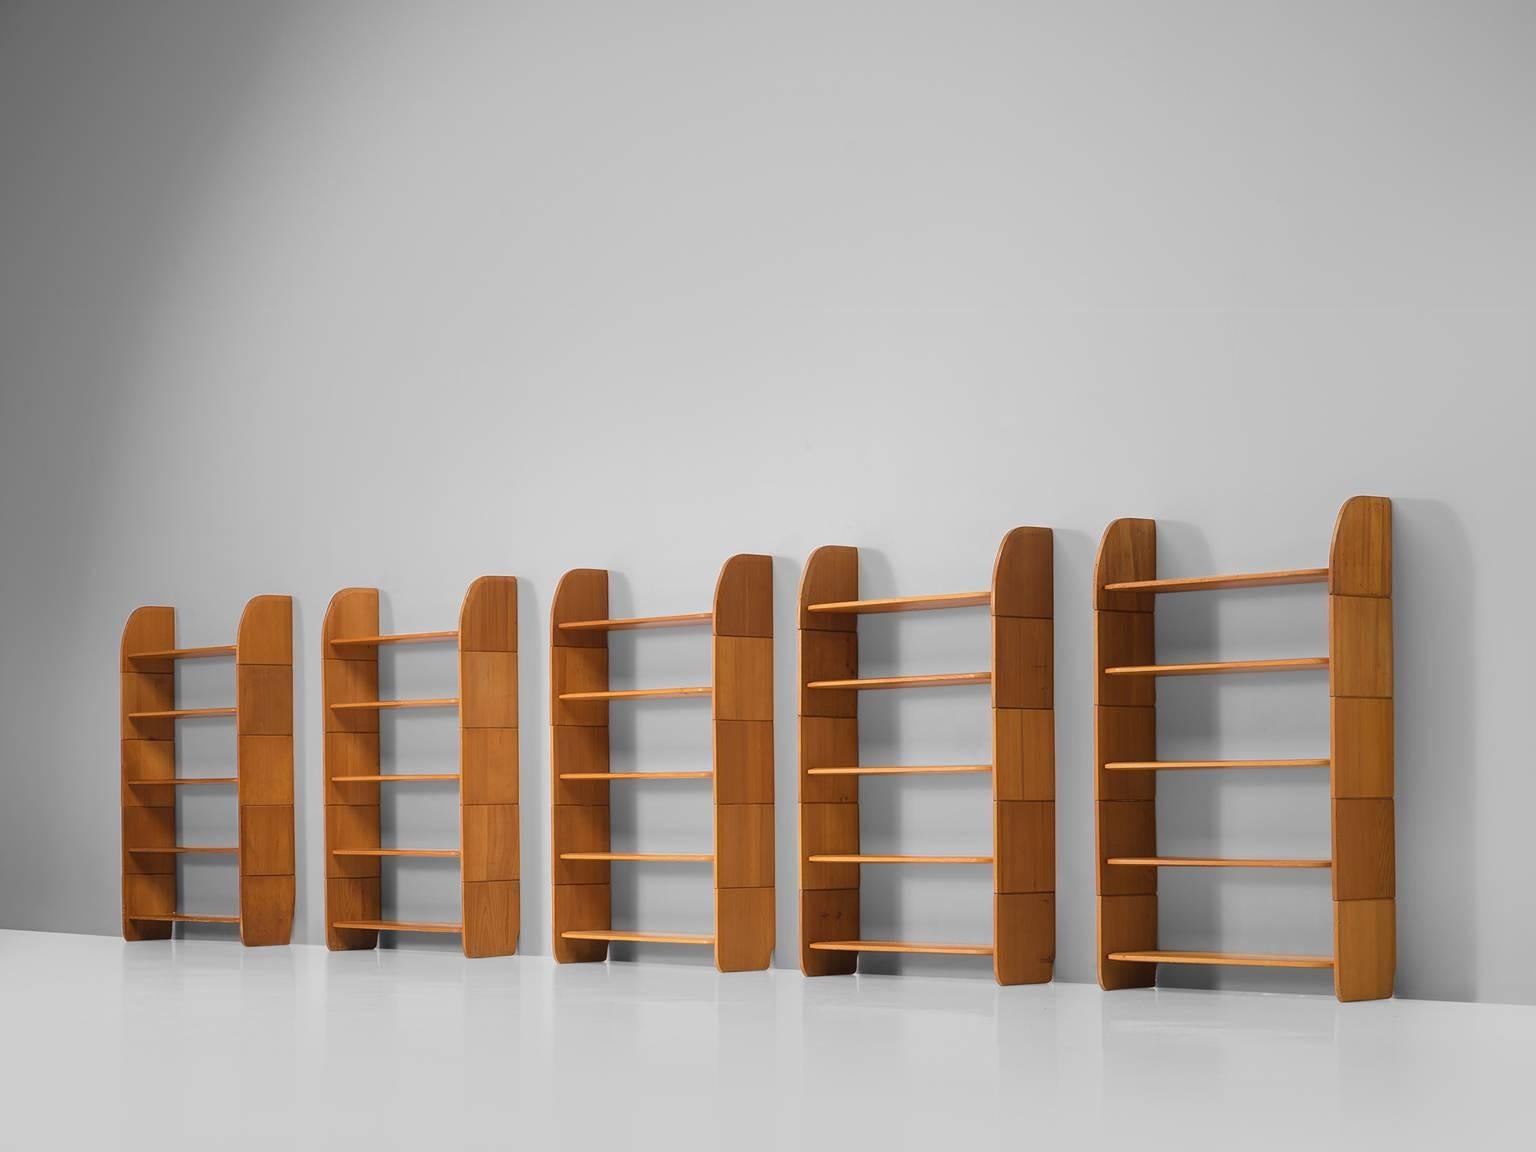 Arthur Milani, Bookshelves, solid pine, Swiss, 1947.

This set of five bookcases in solid pine are part of the midcentury design collection. This set of shelves has a nice simplified yet elegant design. The pine planks on each side become smaller